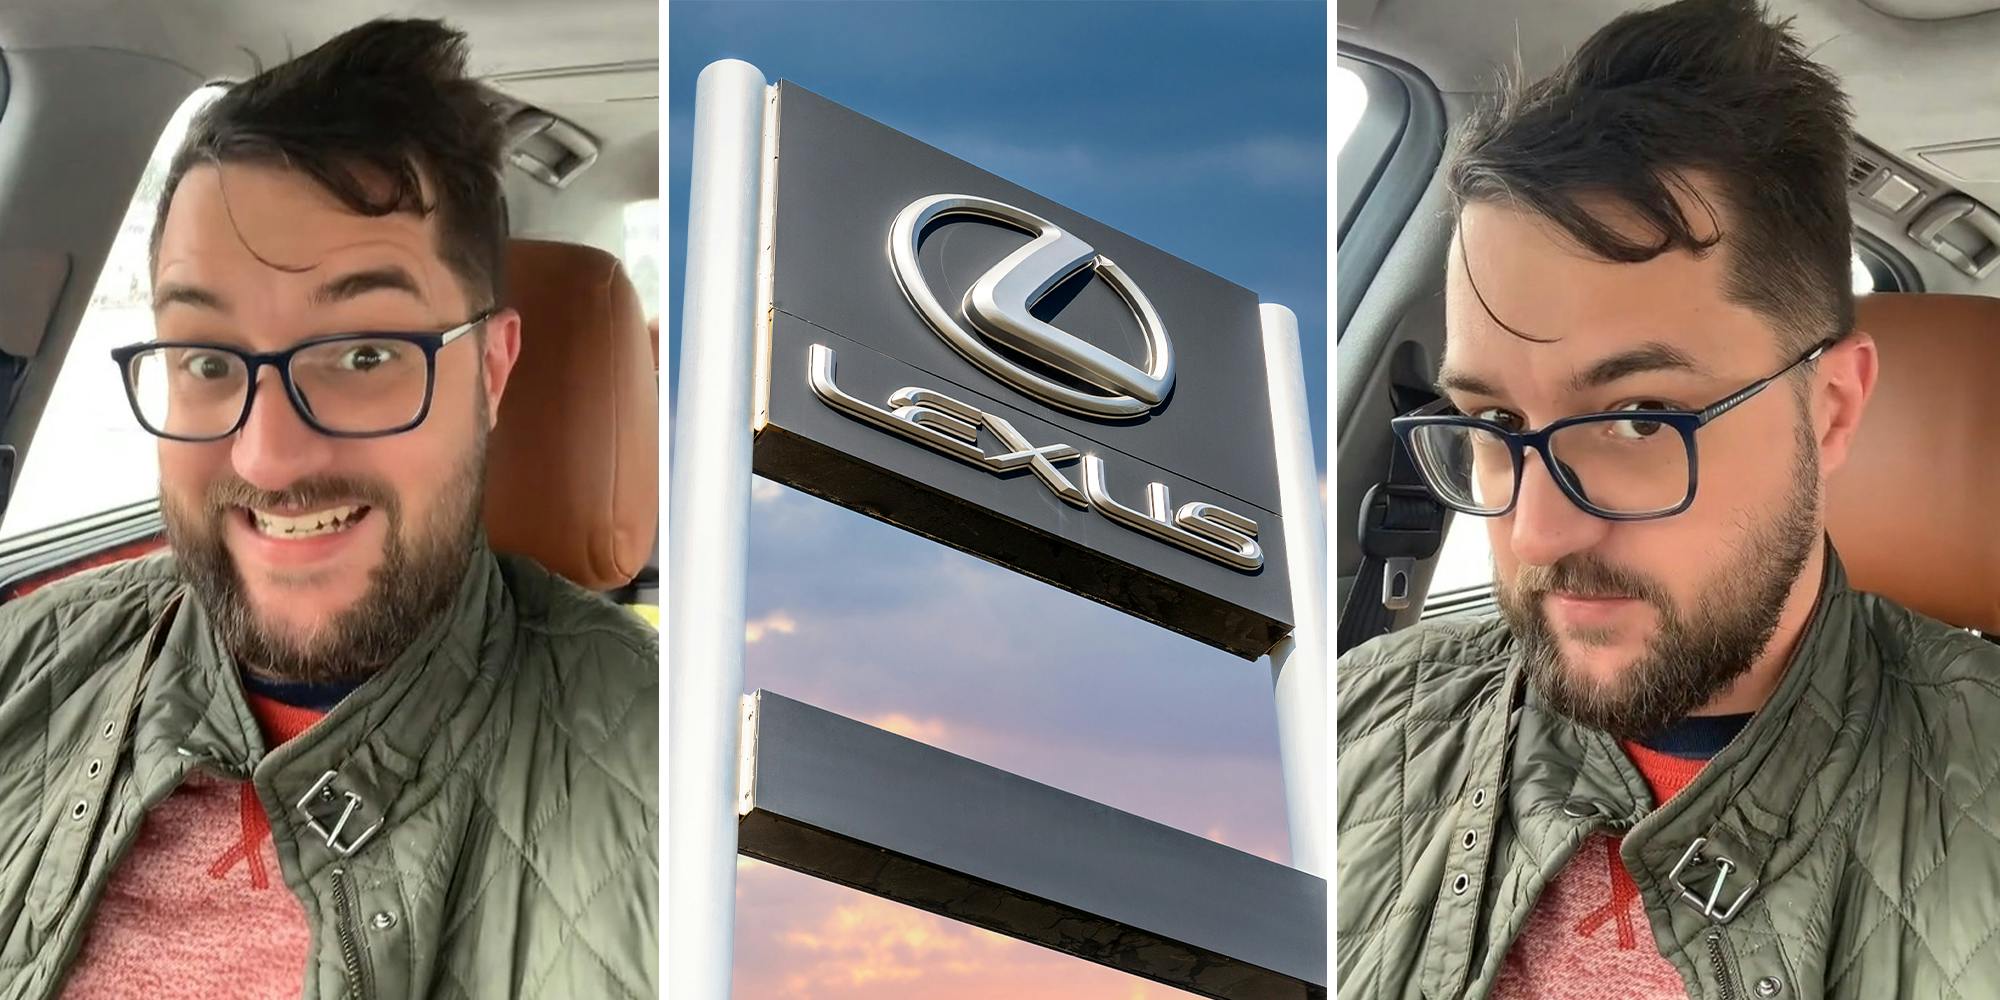 ‘To think I paid $12,000 for this’: Man says this 2004 Lexus that once sold for $75,000 is still nicer than anything else on the market